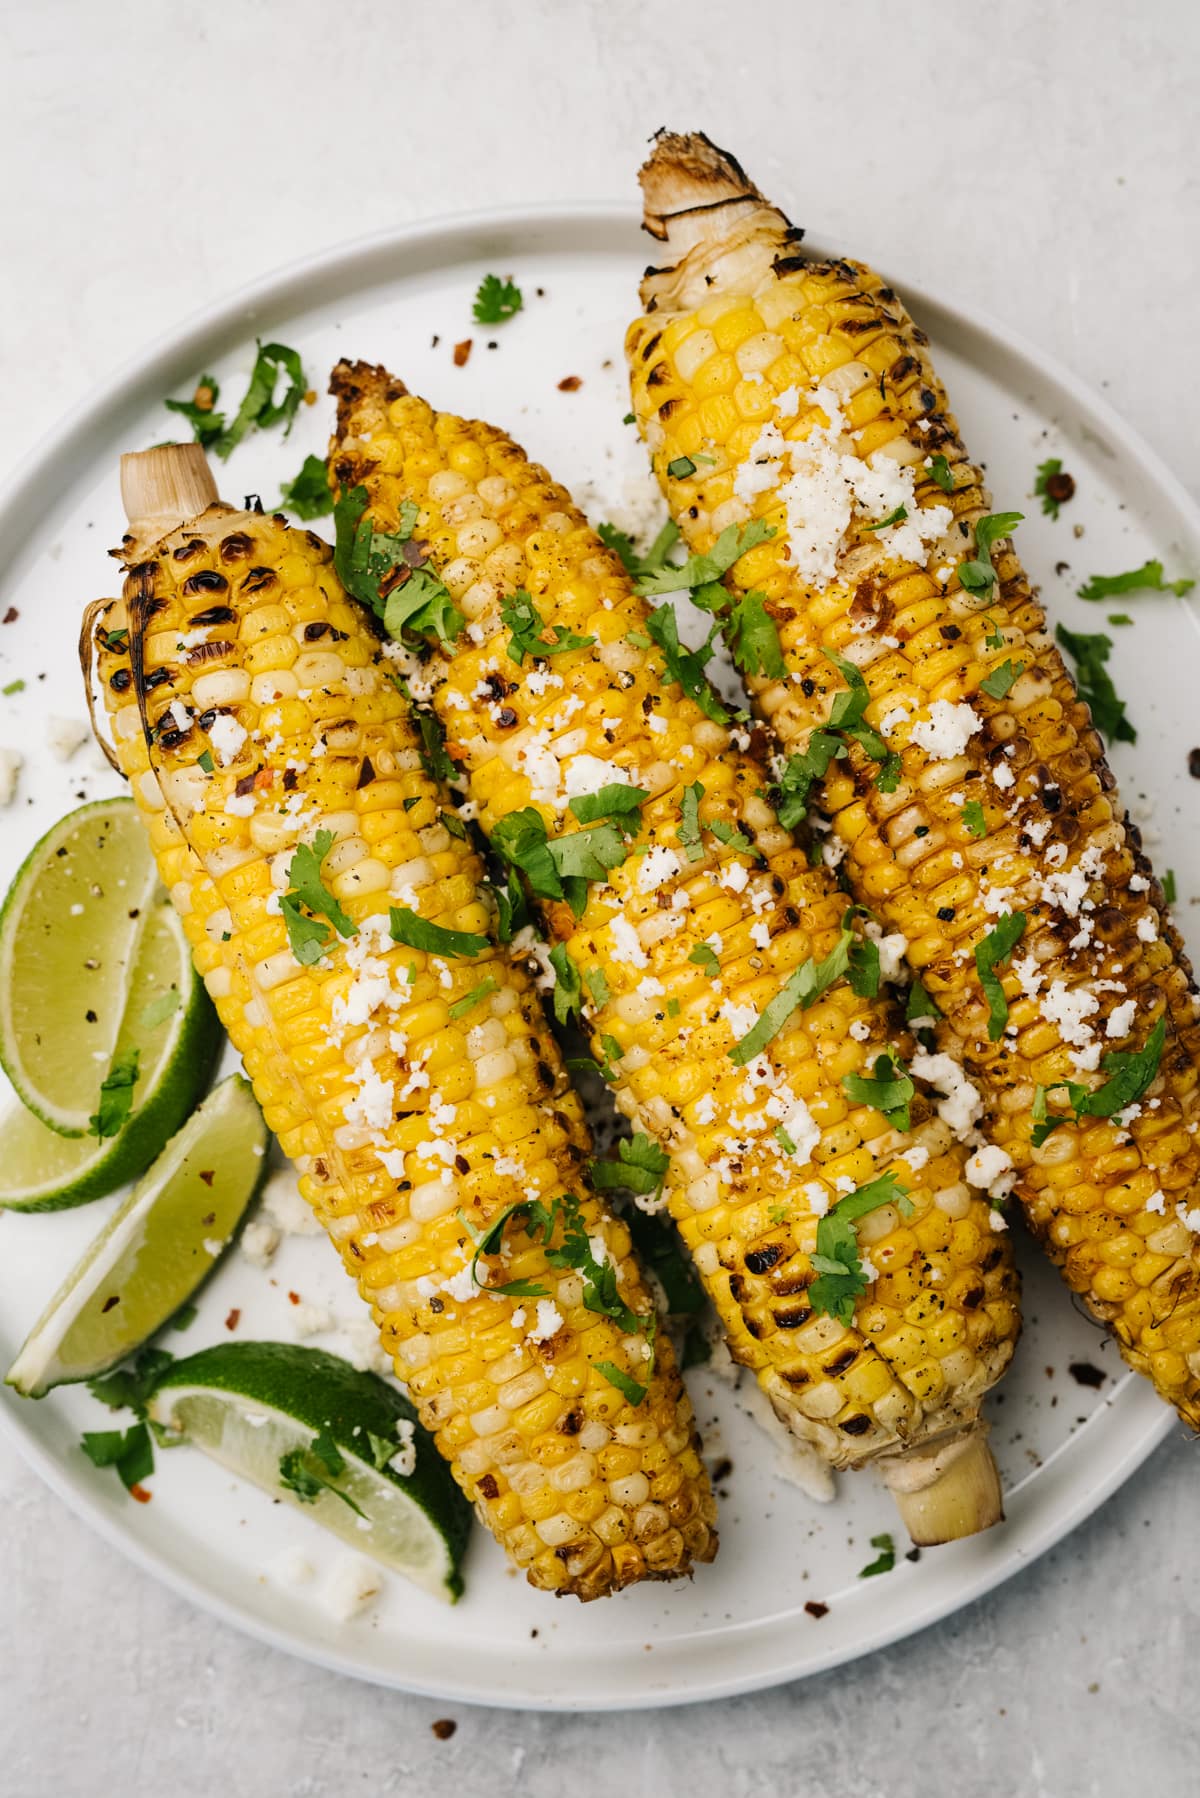 Three ears of grilled corn on the cob topped with lime juice, cilantro, and queso fresco cheese.